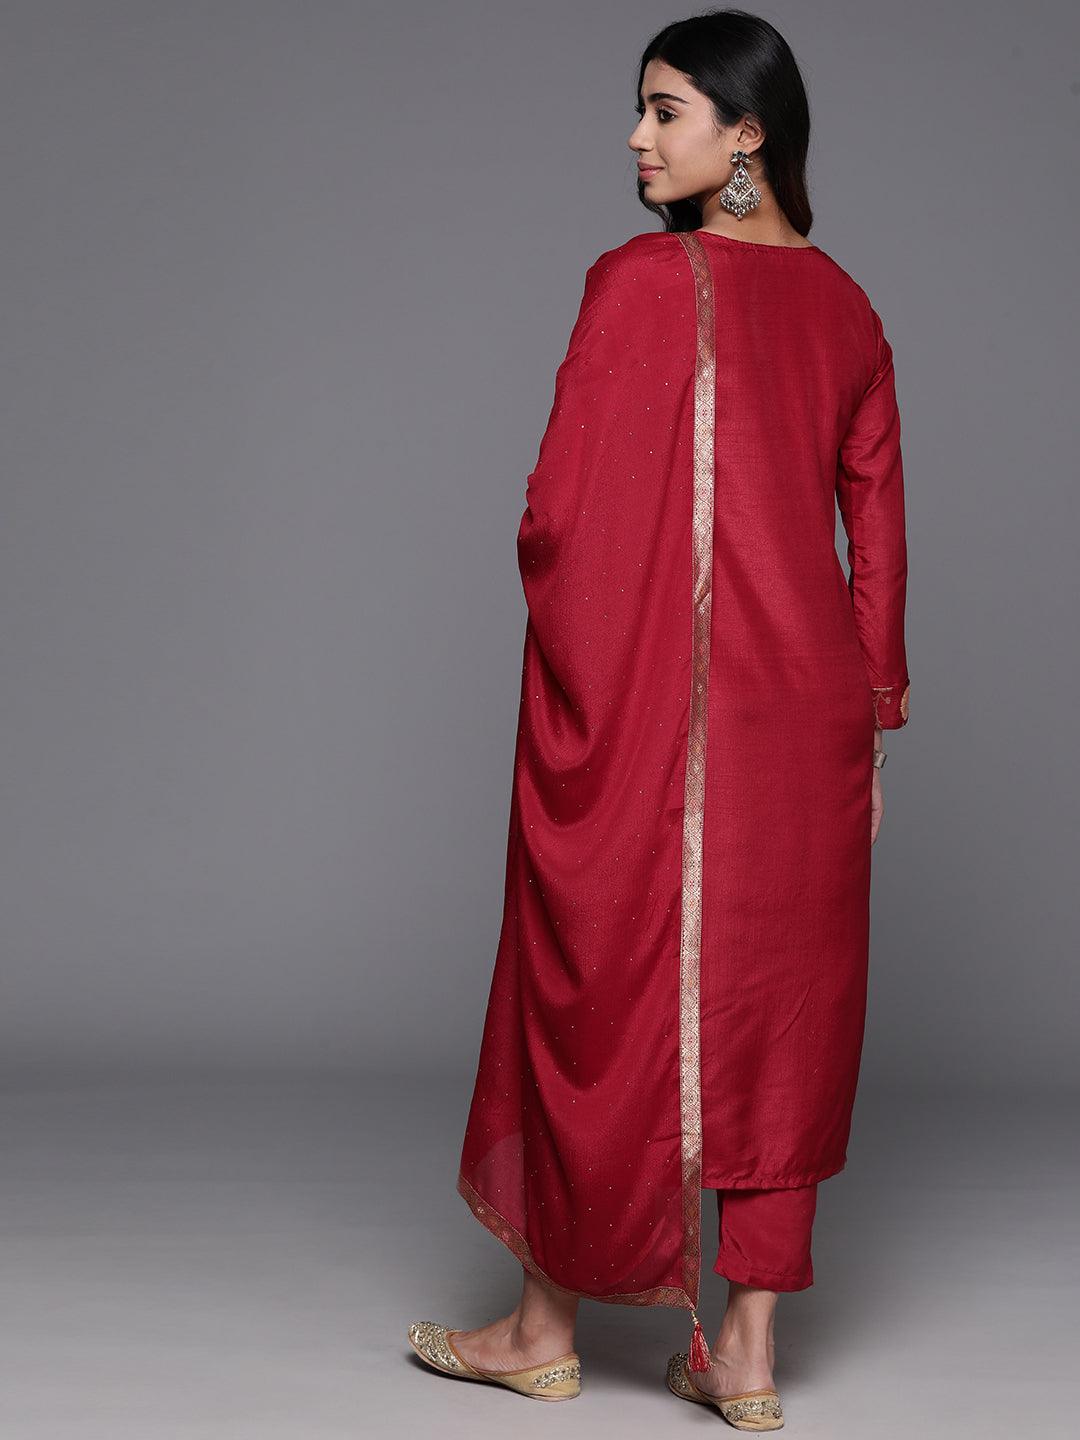 Red Woven Design Silk Blend Straight Suit With Dupatta